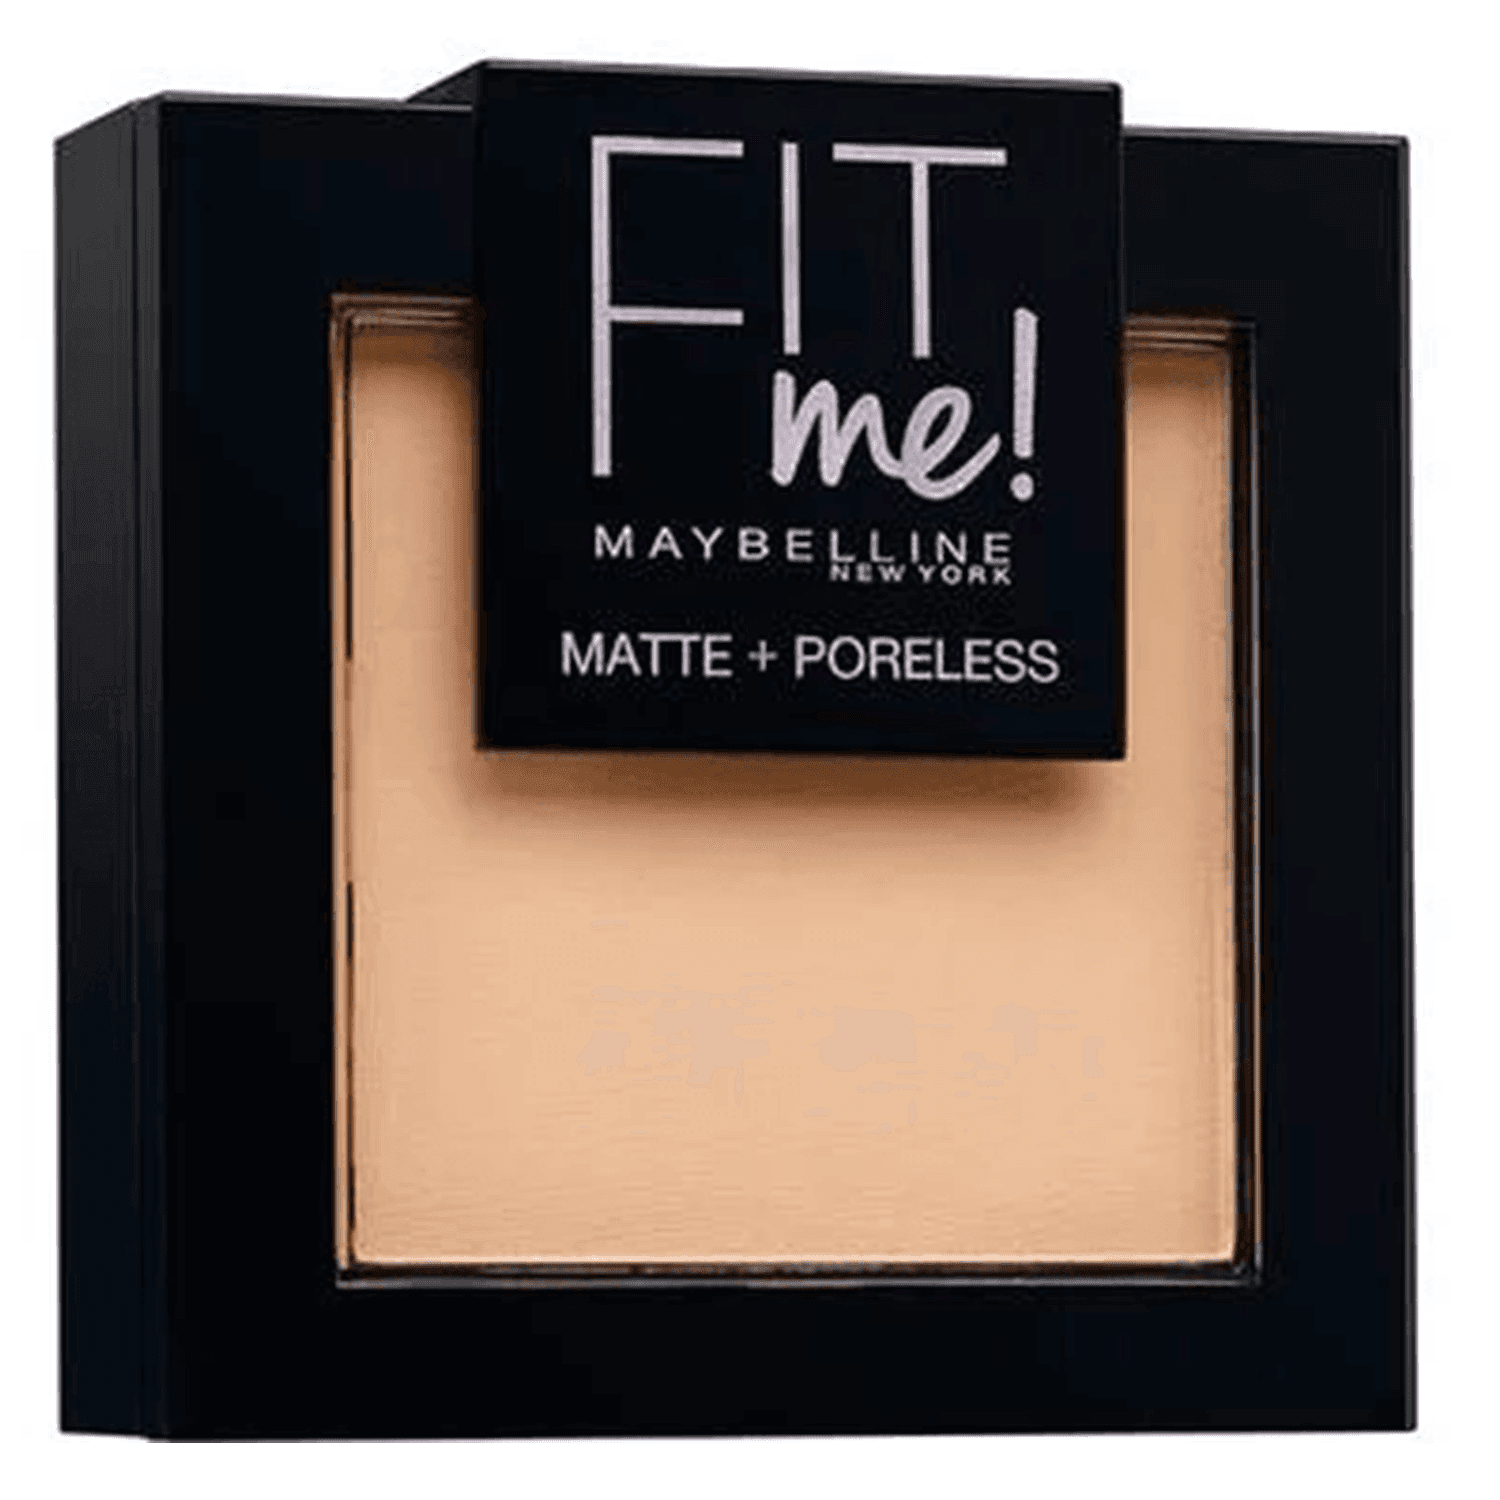 Maybelline NY Teint - Poudre Fit Me! Matte + Poreless 115 Ivory